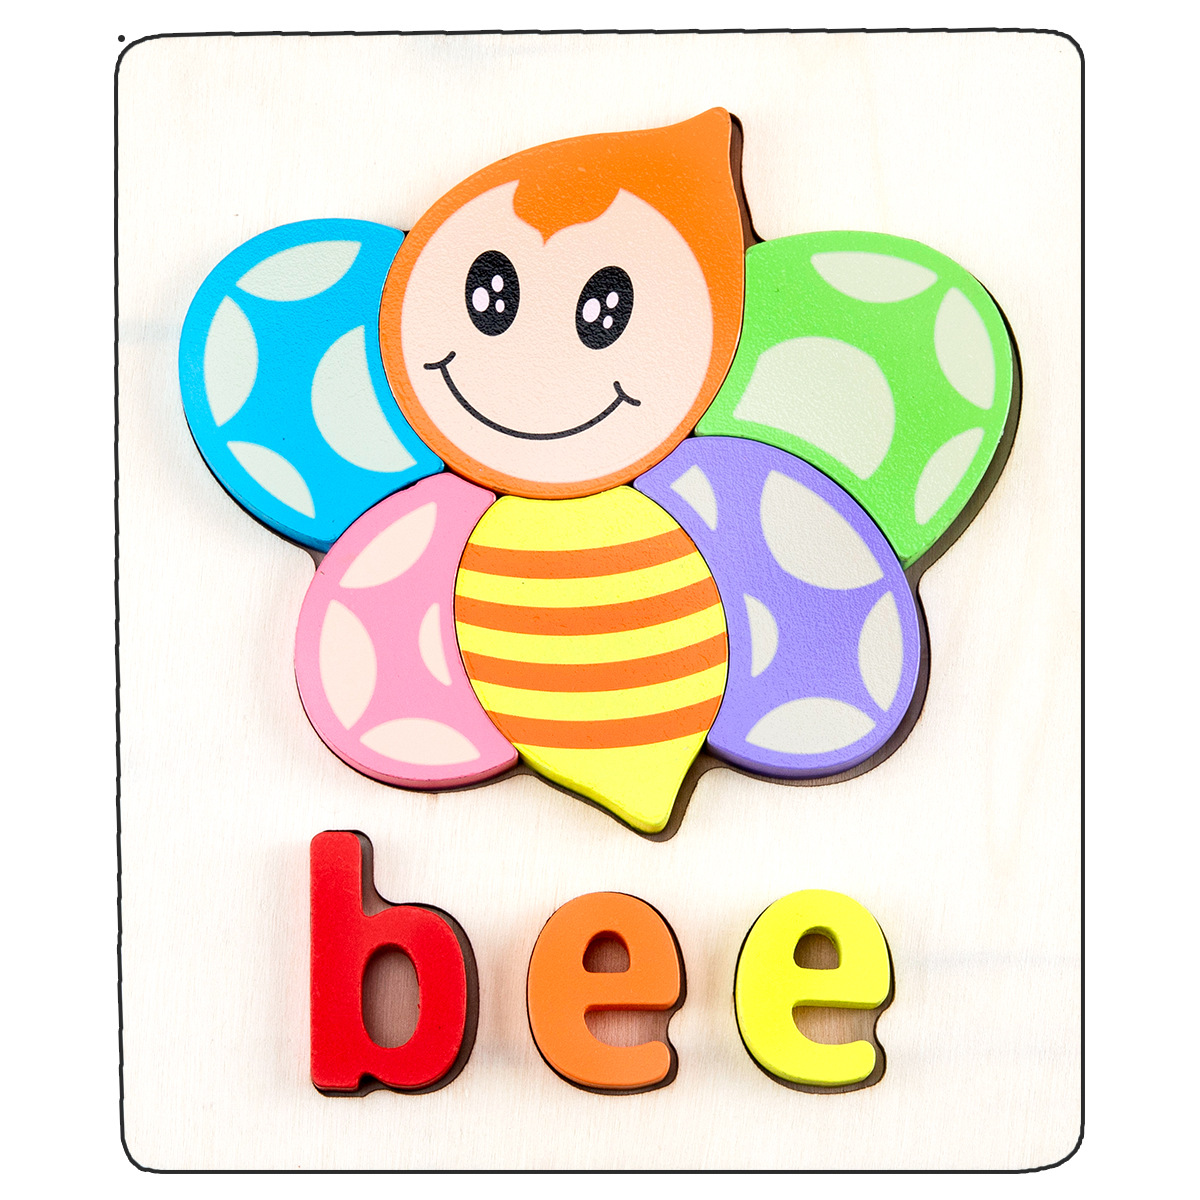 TOY 3D EDUCATIONAL WOODEN TOY IN THE FORM OF A BEE